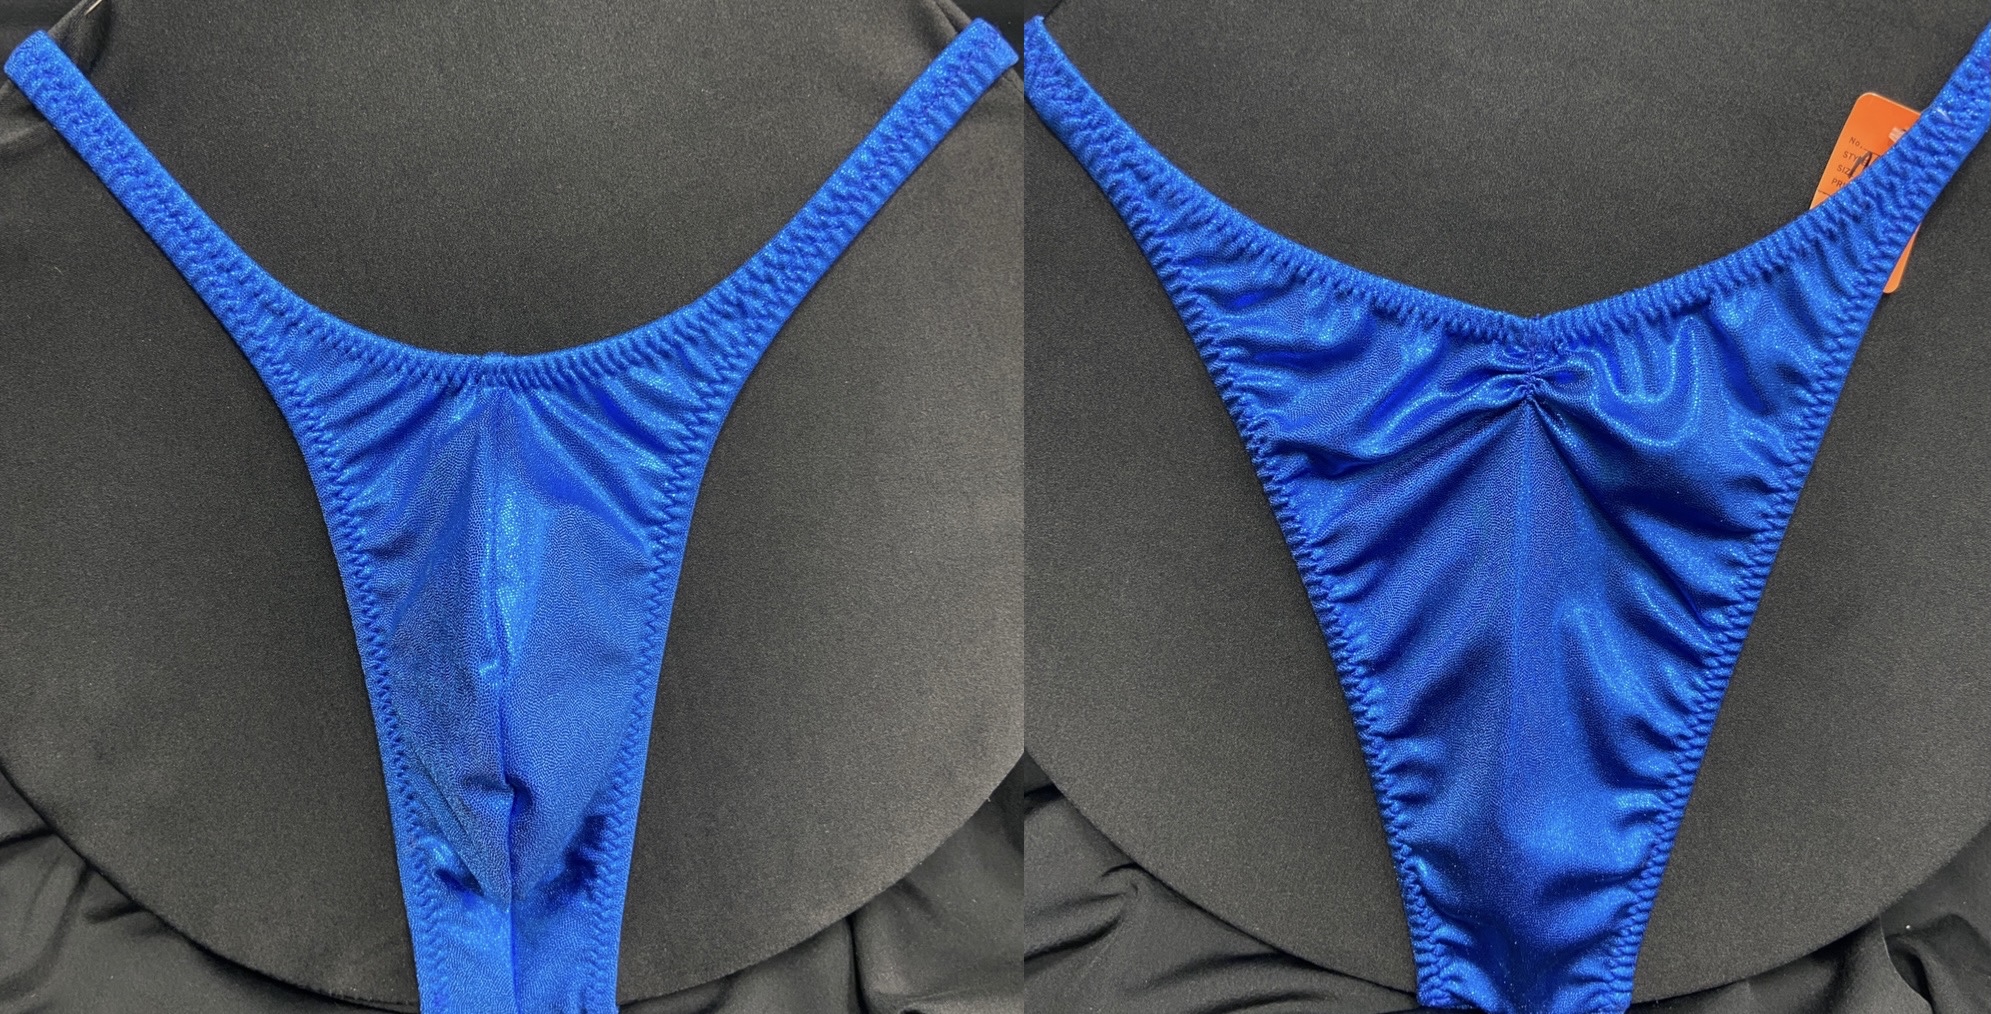 Medium Blue Frost 
Pro Cut 
available in S,M,L,XL
back gathers optional
$65